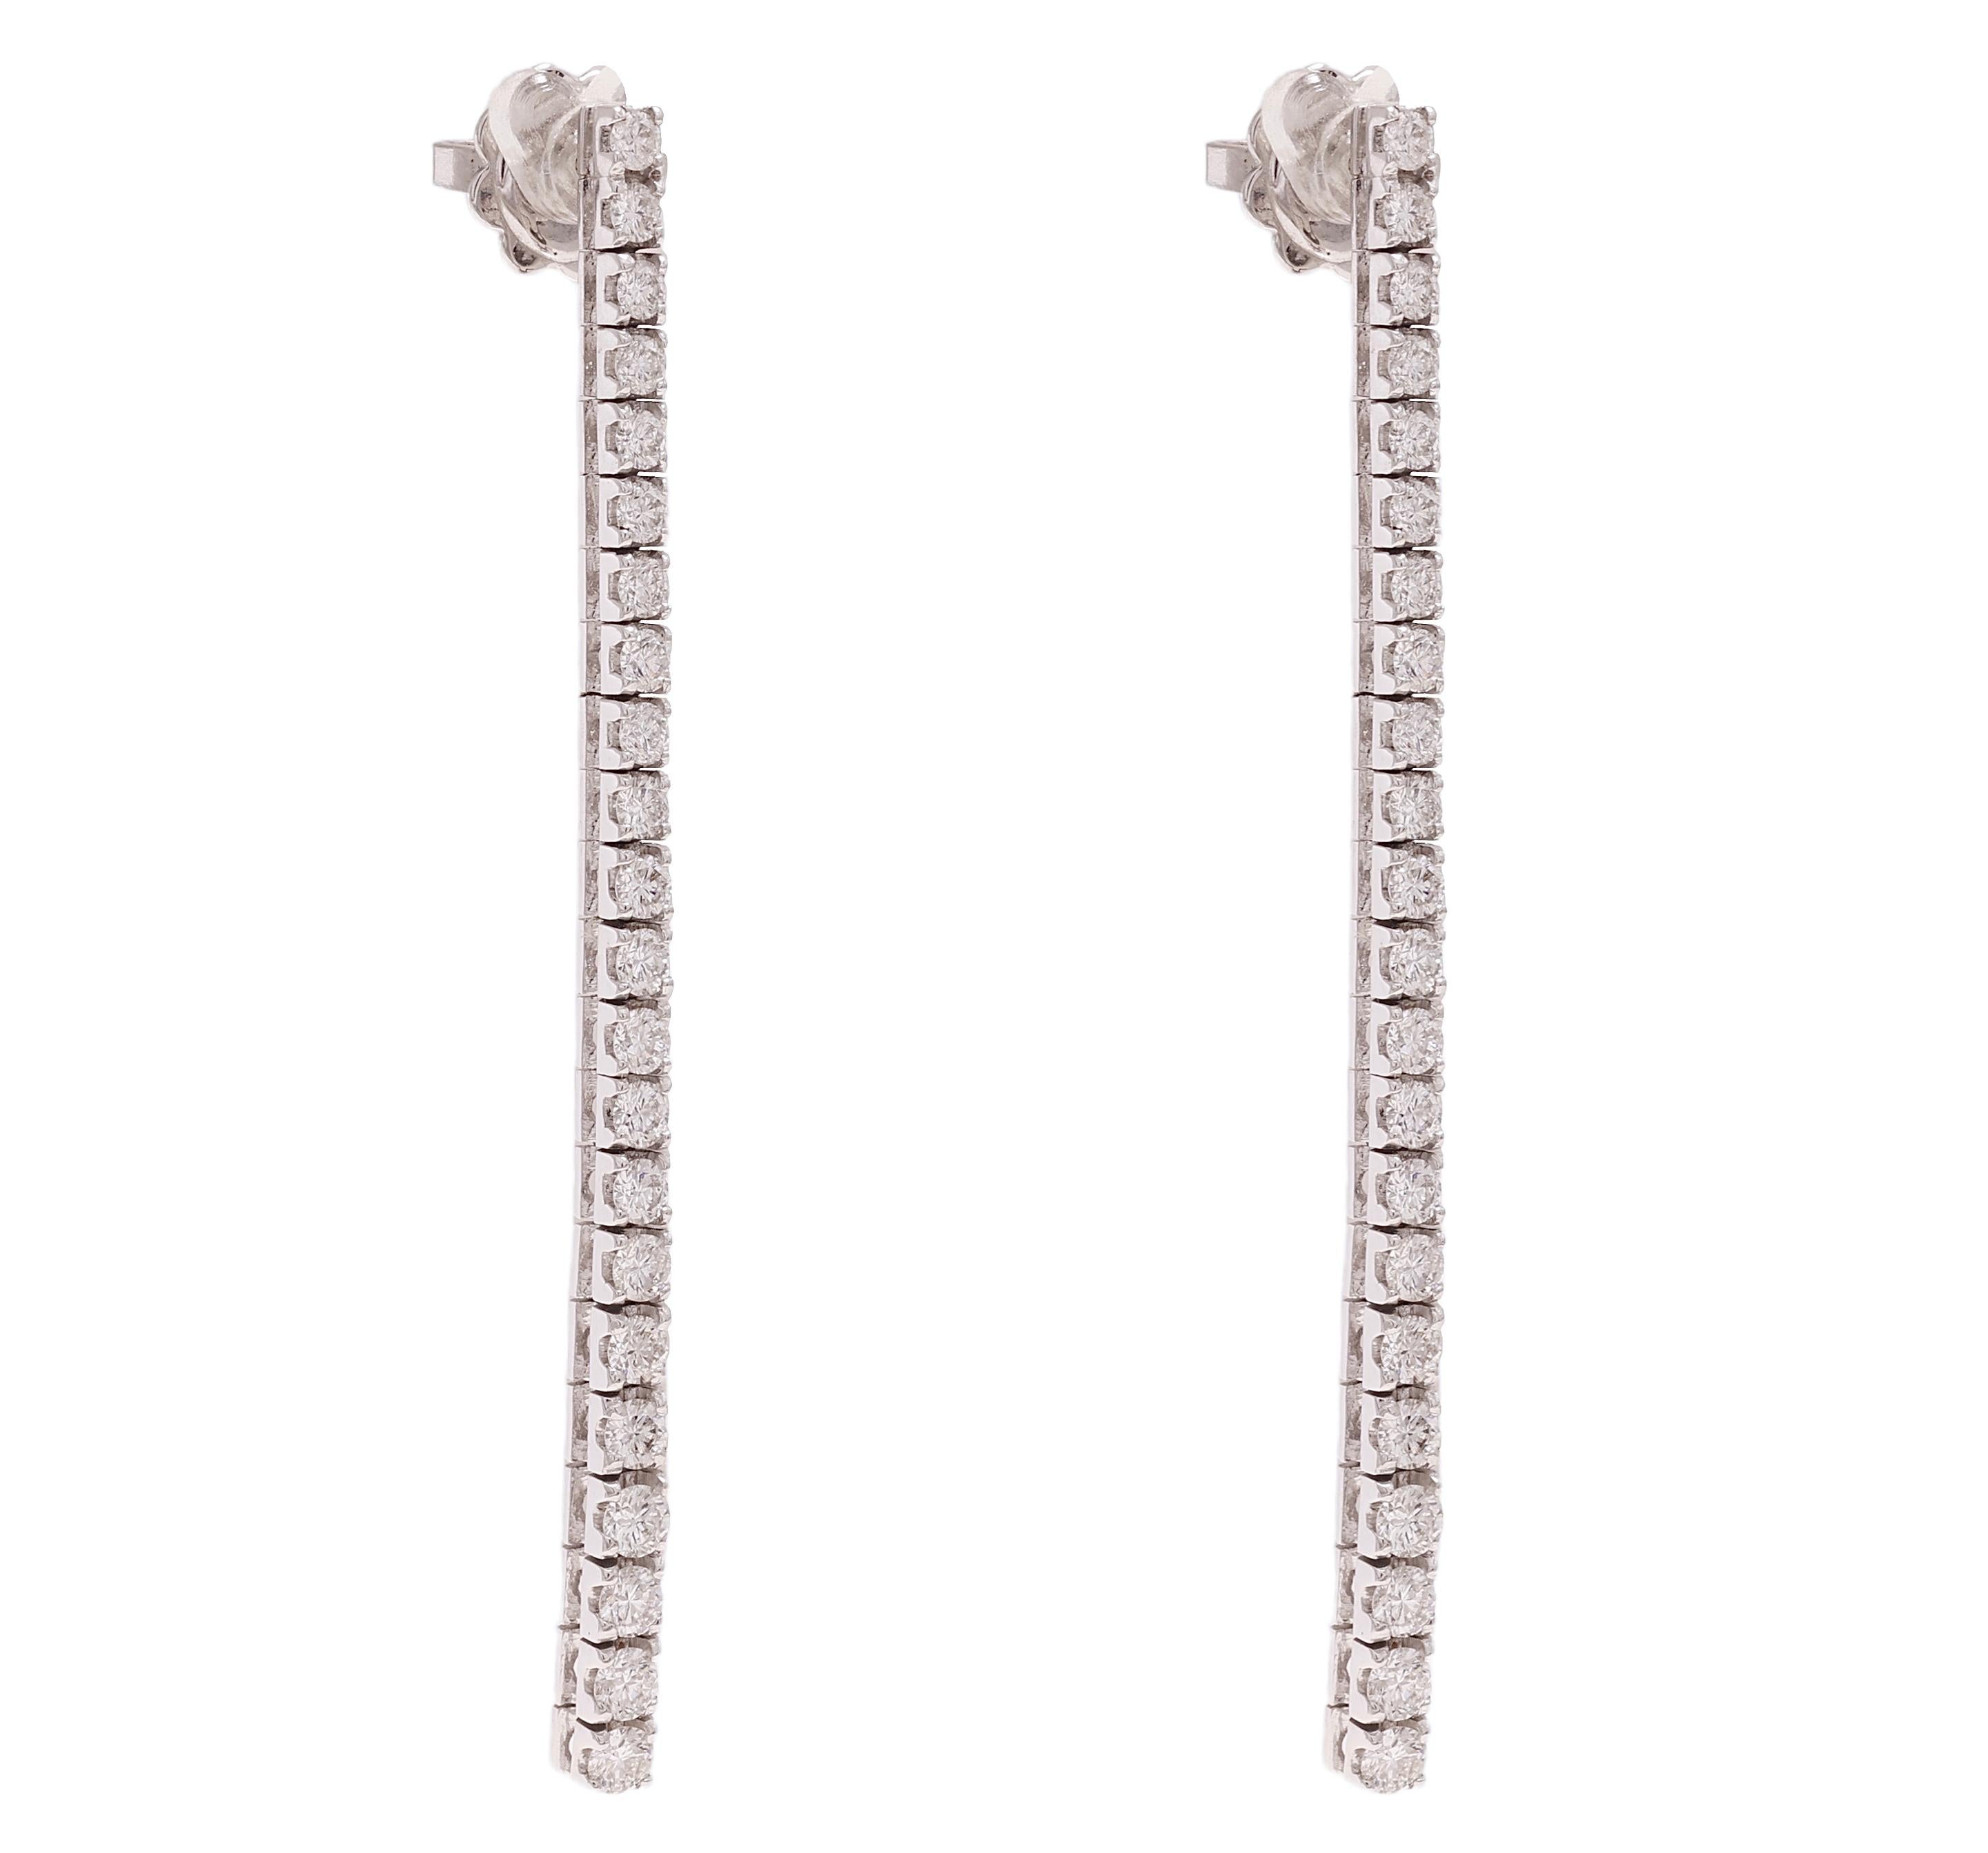 Gorgeous 18 kt. White Gold Tennis Earrings With 2.2 ct. Diamonds

Diamonds: Brilliant cut diamonds together approx. 2.2 GSI

Material: 18 kt. white gold

Measurements: 56.5 mm long

Total weight: 7.2 gram / 0.255 oz / 4.6 dwt

Earrings will come